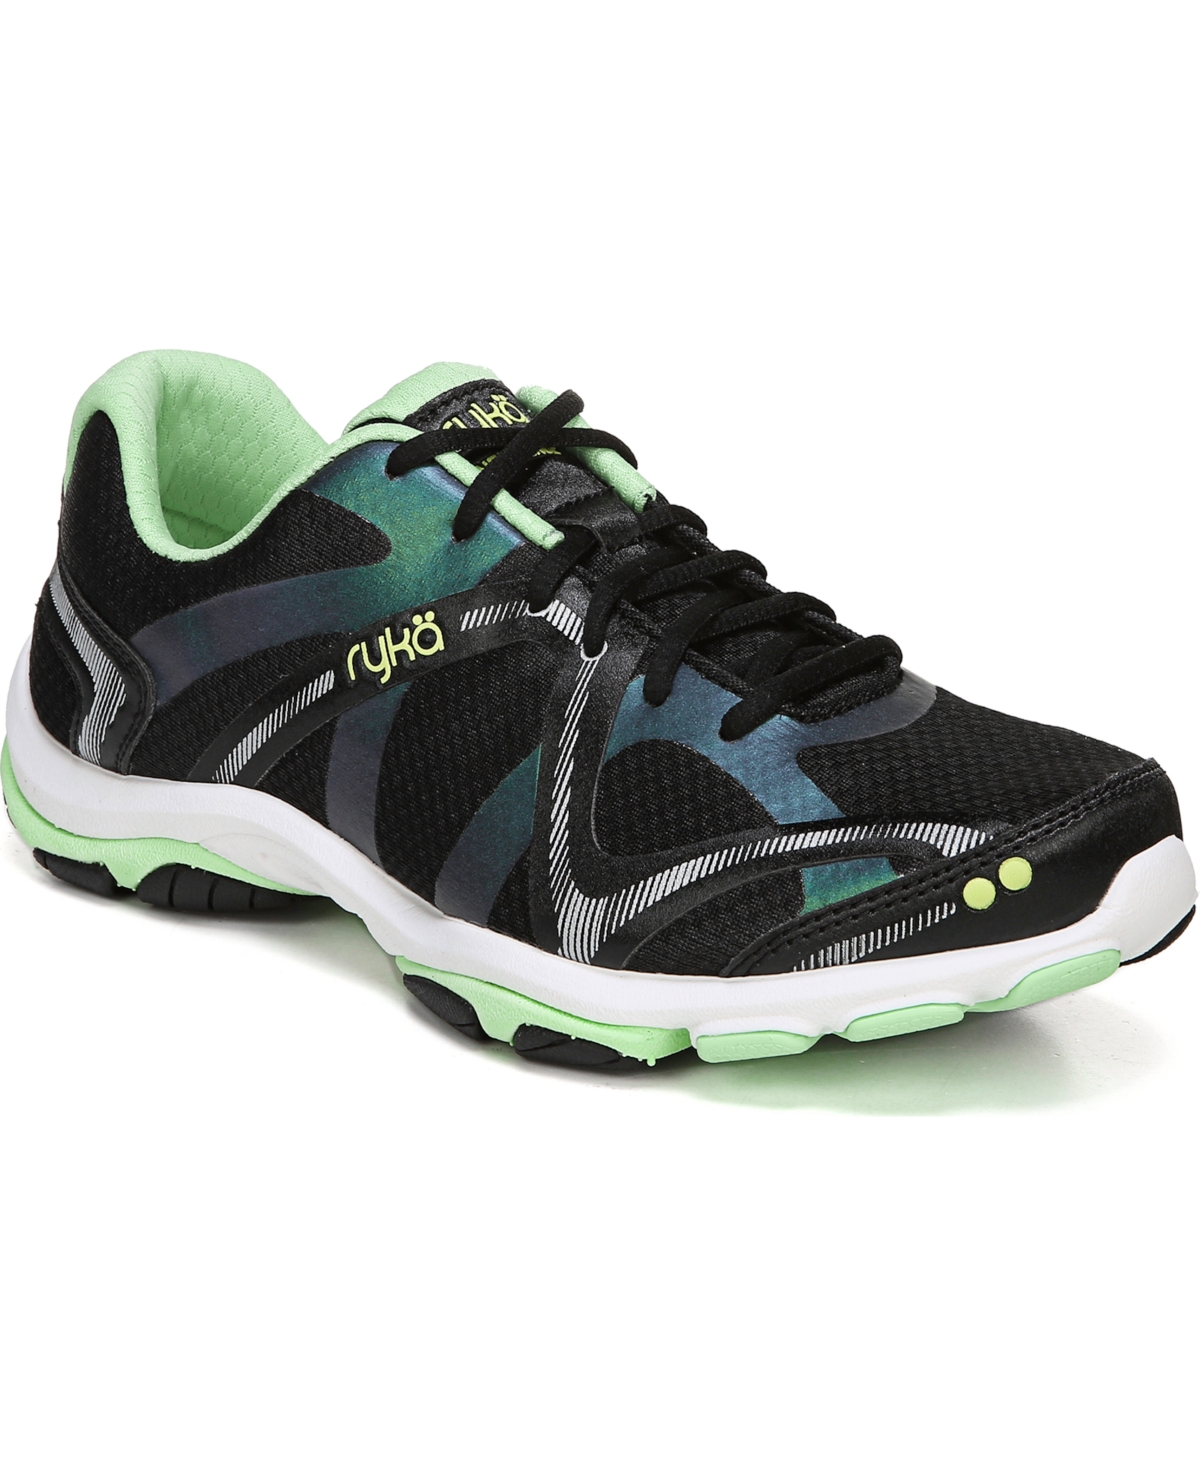 Women's Influence Training Sneakers - Black/Green Mesh/Faux Leather